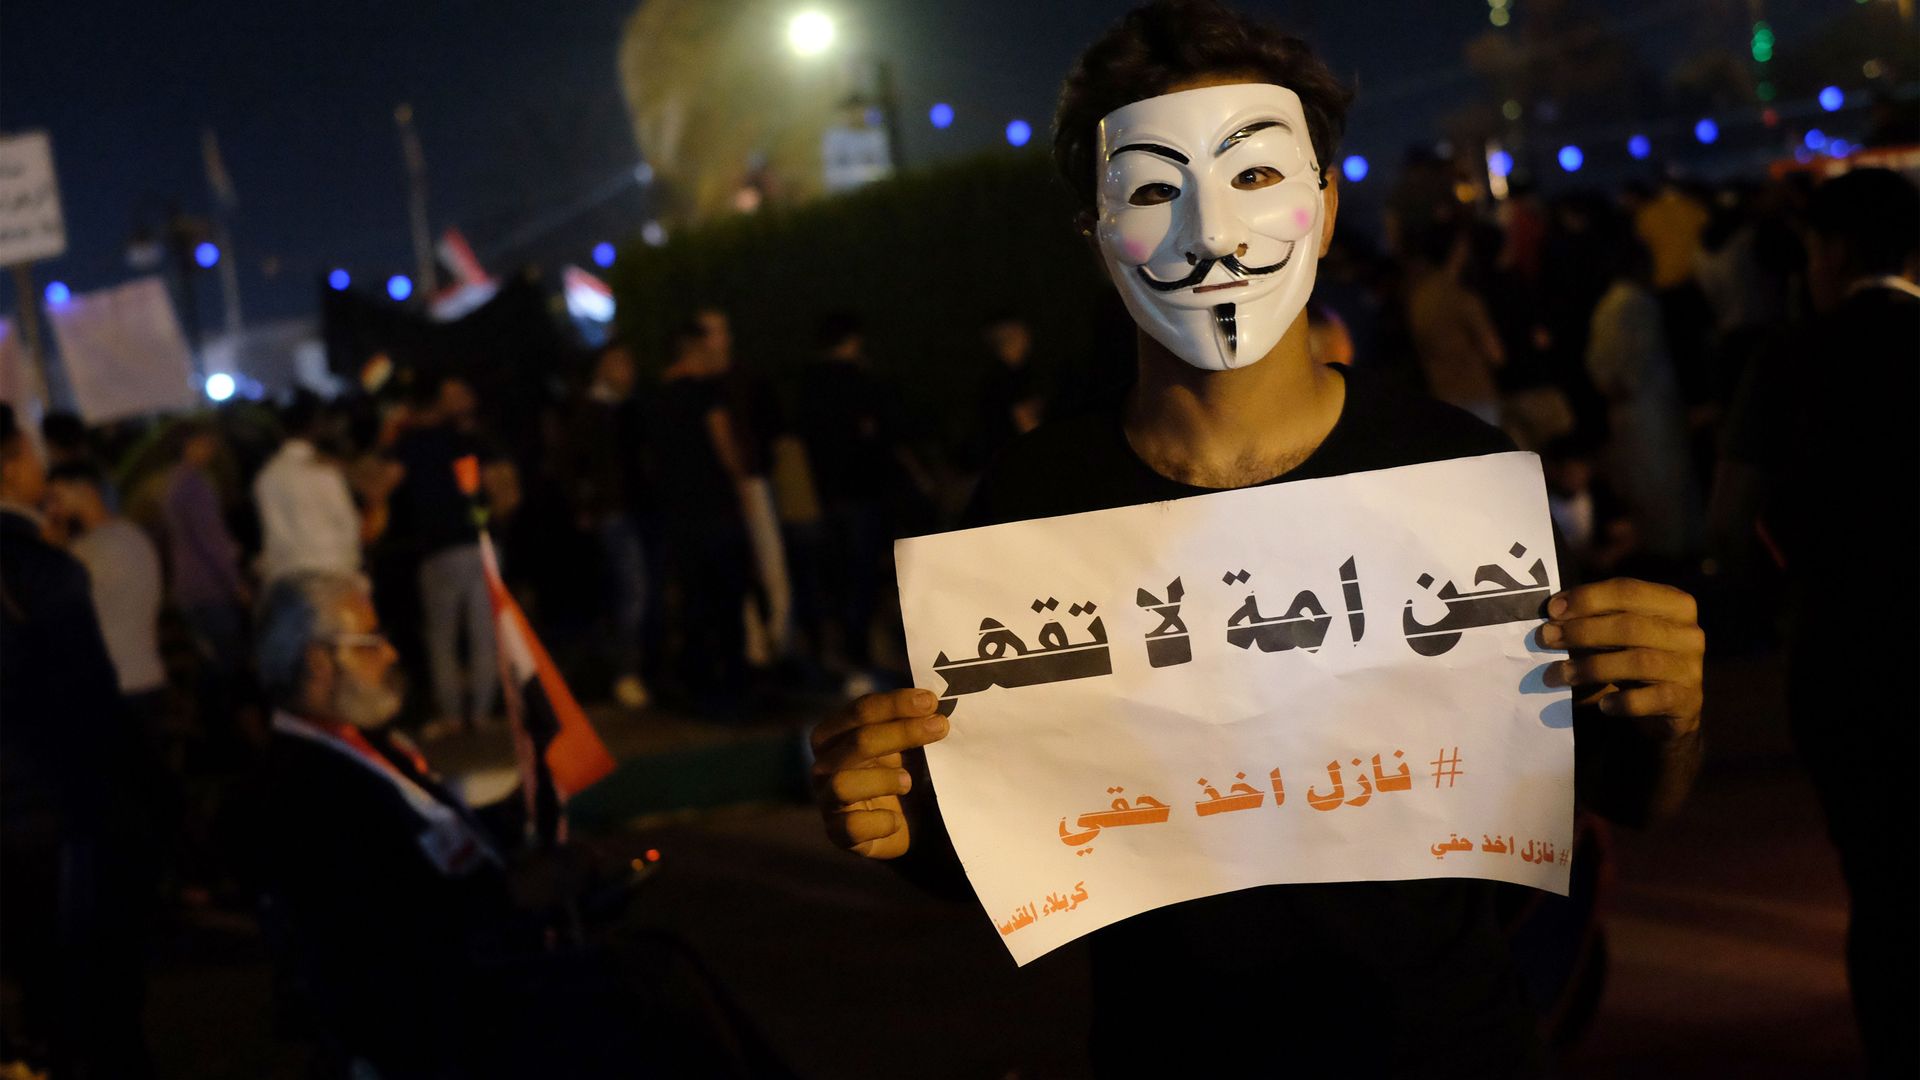  An Iraqi protester holds a placard during ongoing anti-government demonstrations in the Shiite shrine city of Karbala, south of Iraq's capital Baghdad, on November 1